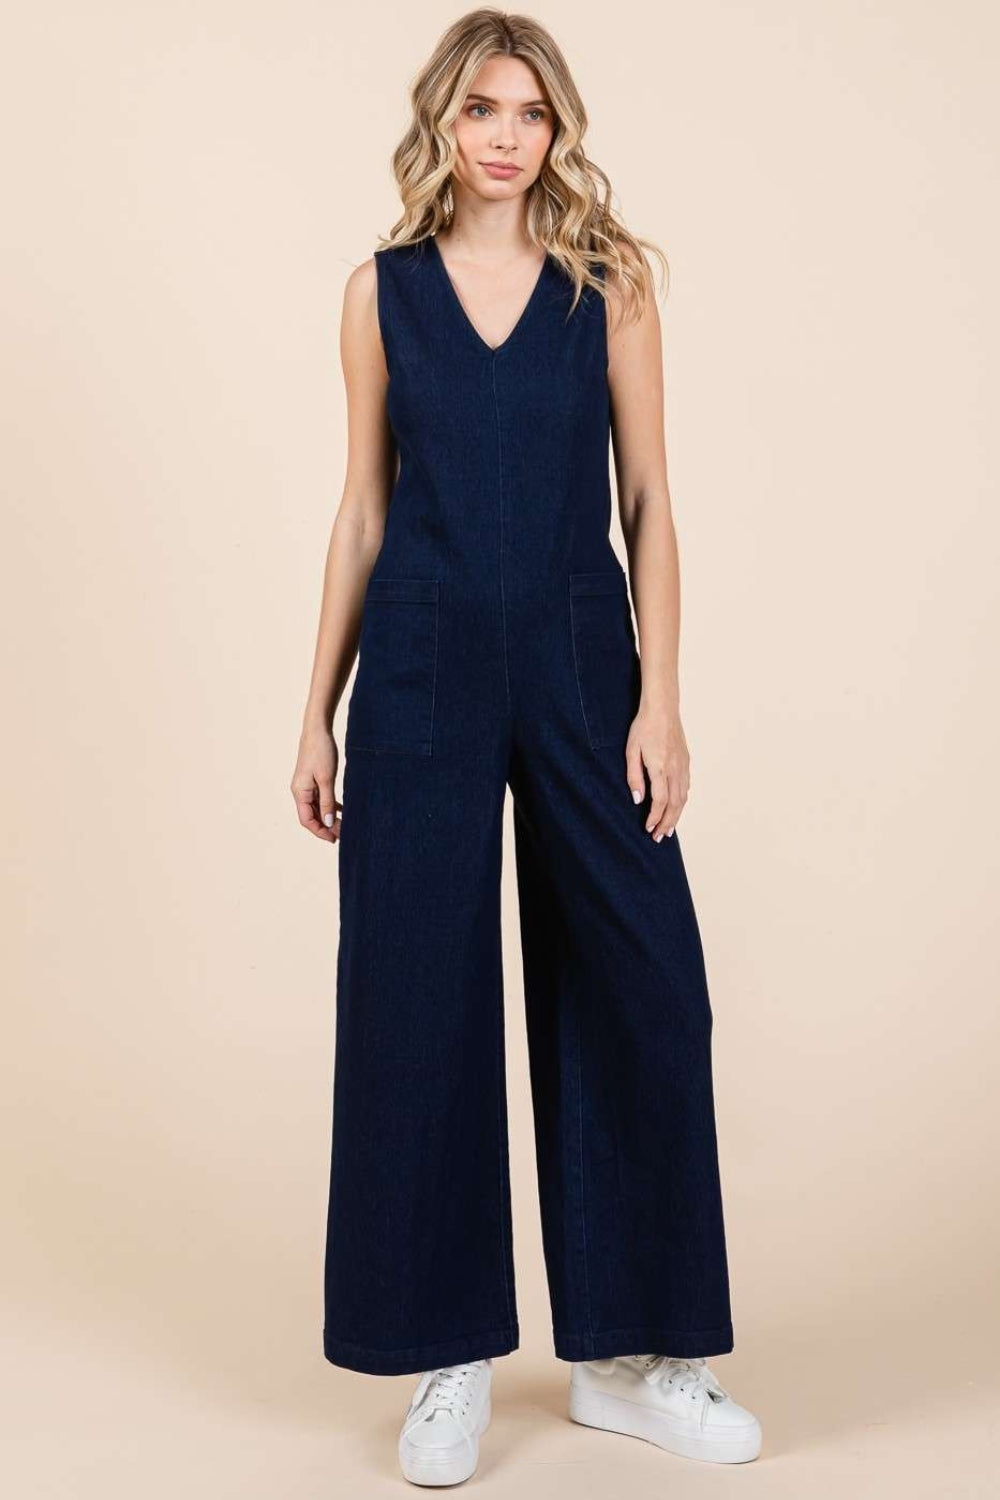 Mittoshop Sleeveless Wide Leg Denim Jumpsuit-Jumpsuits & Rompers-Inspired by Justeen-Women's Clothing Boutique in Chicago, Illinois